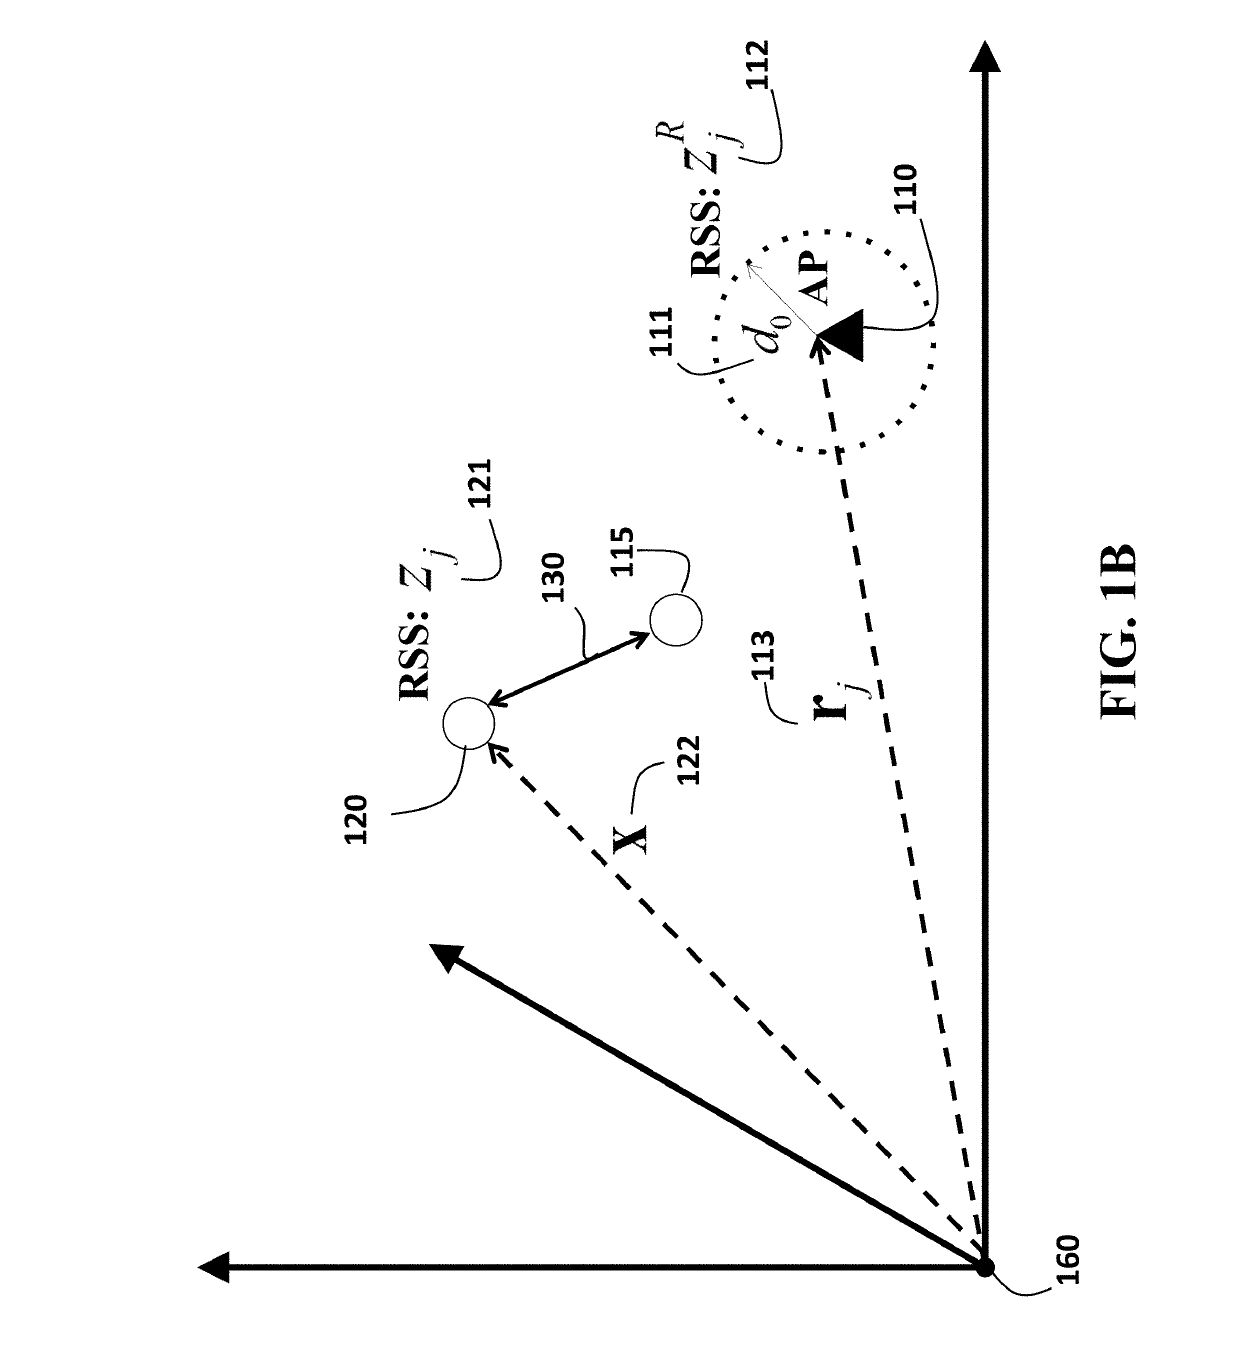 Device localization using RSS based path loss exponent estimation